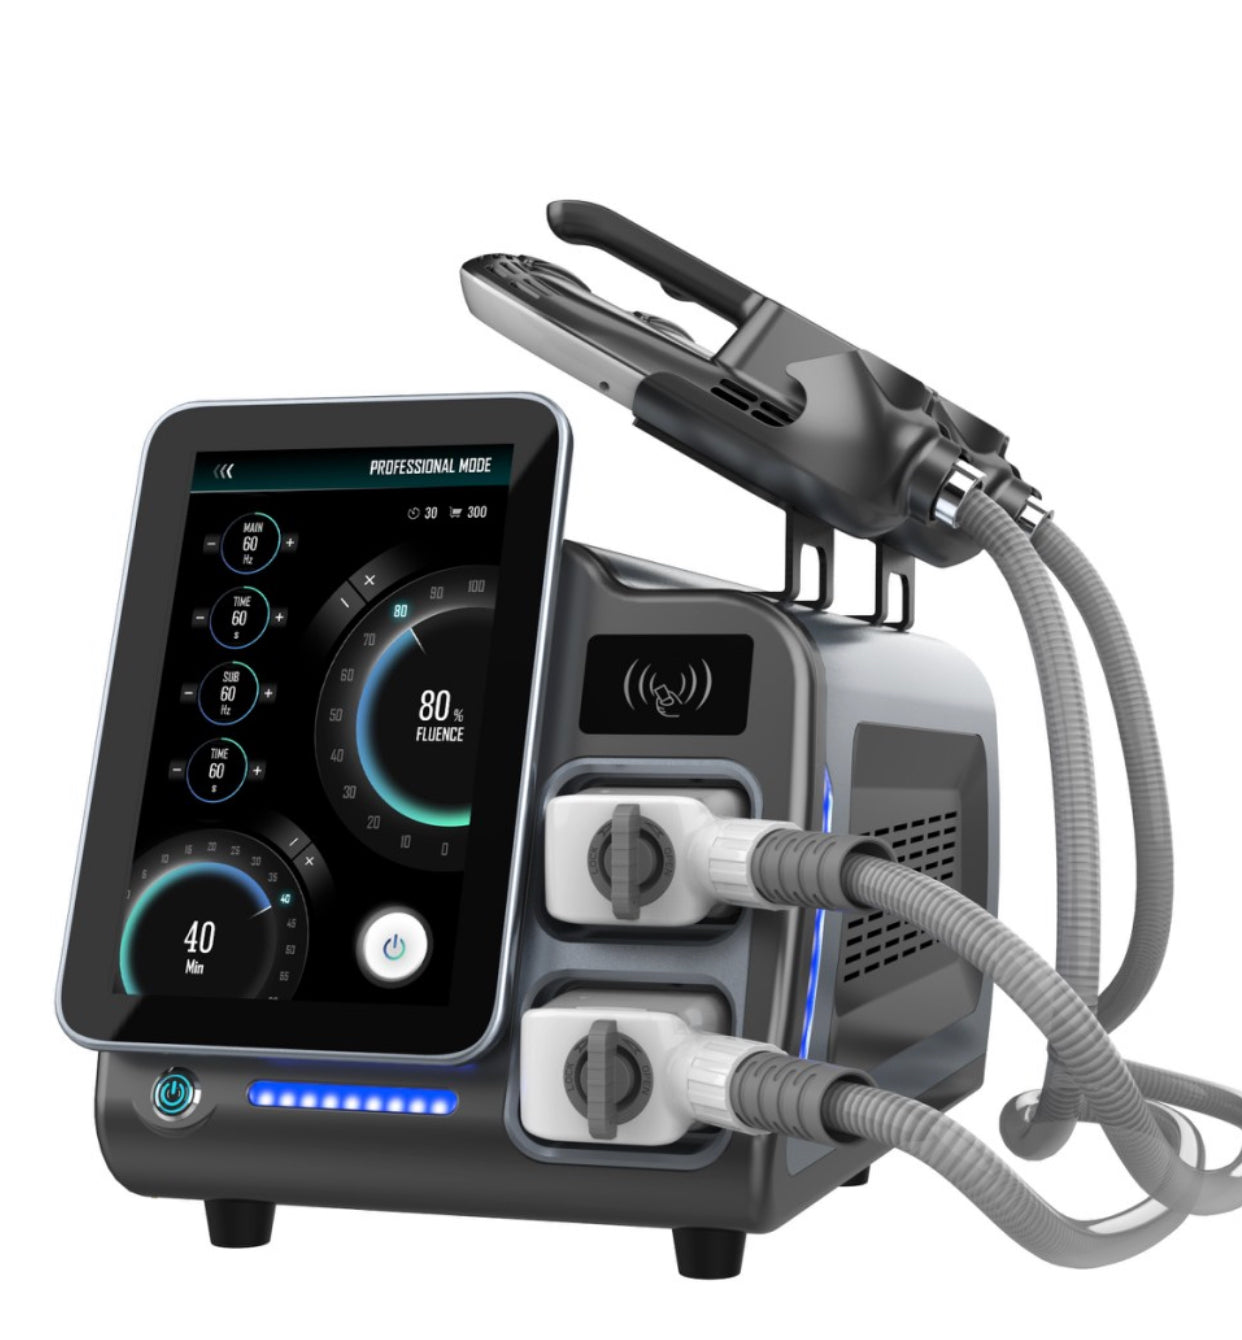 Digital Frequency Conversion Muscle Growing Best EMS Machine